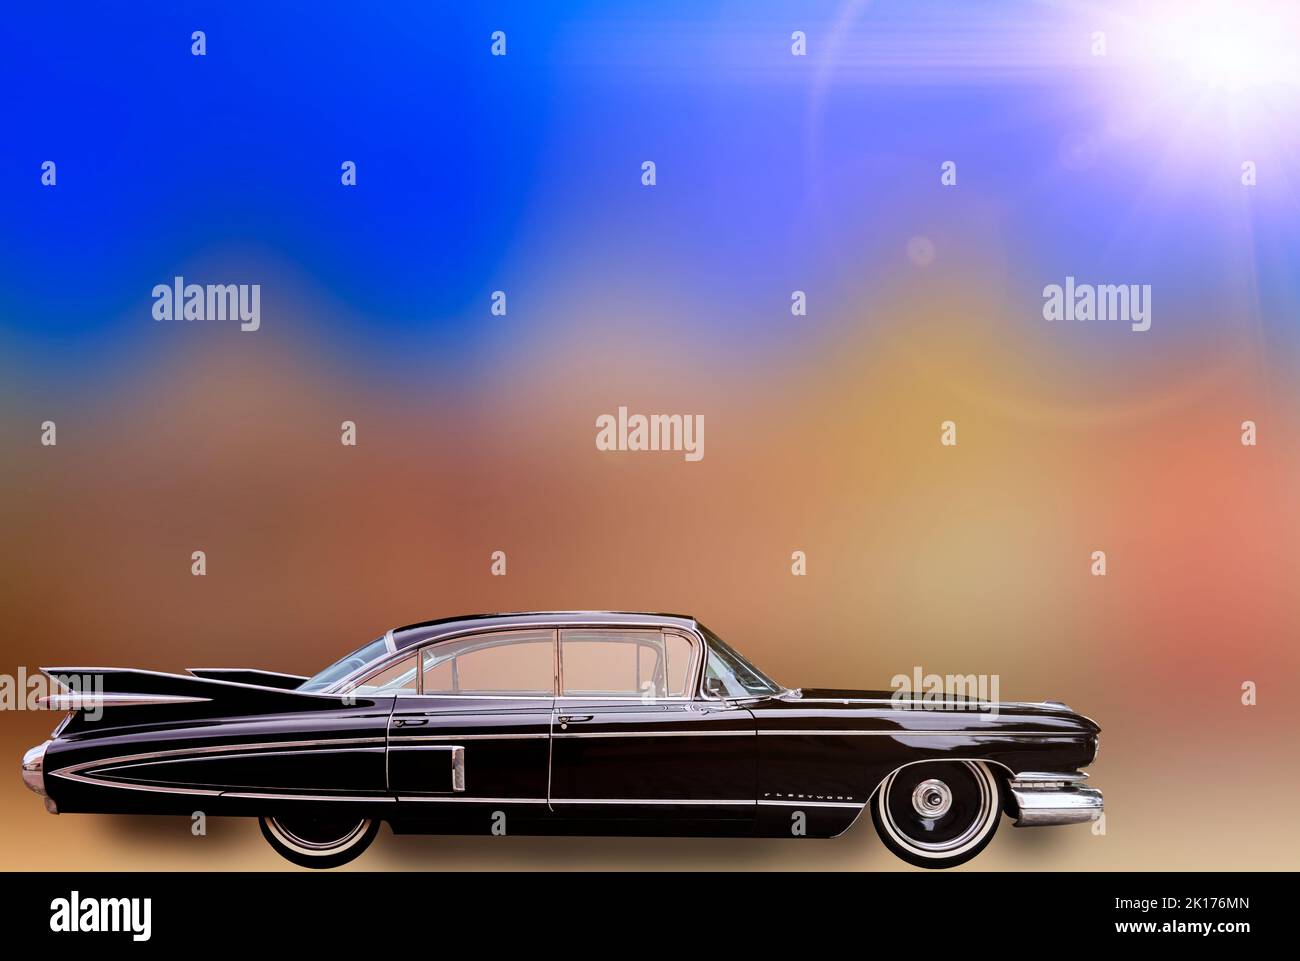 Cadillac Fleetwood in black, side view of huge American road cruiser against blurred background, Vehicle location Lehnin, Germany, September 11, 2022. Stock Photo